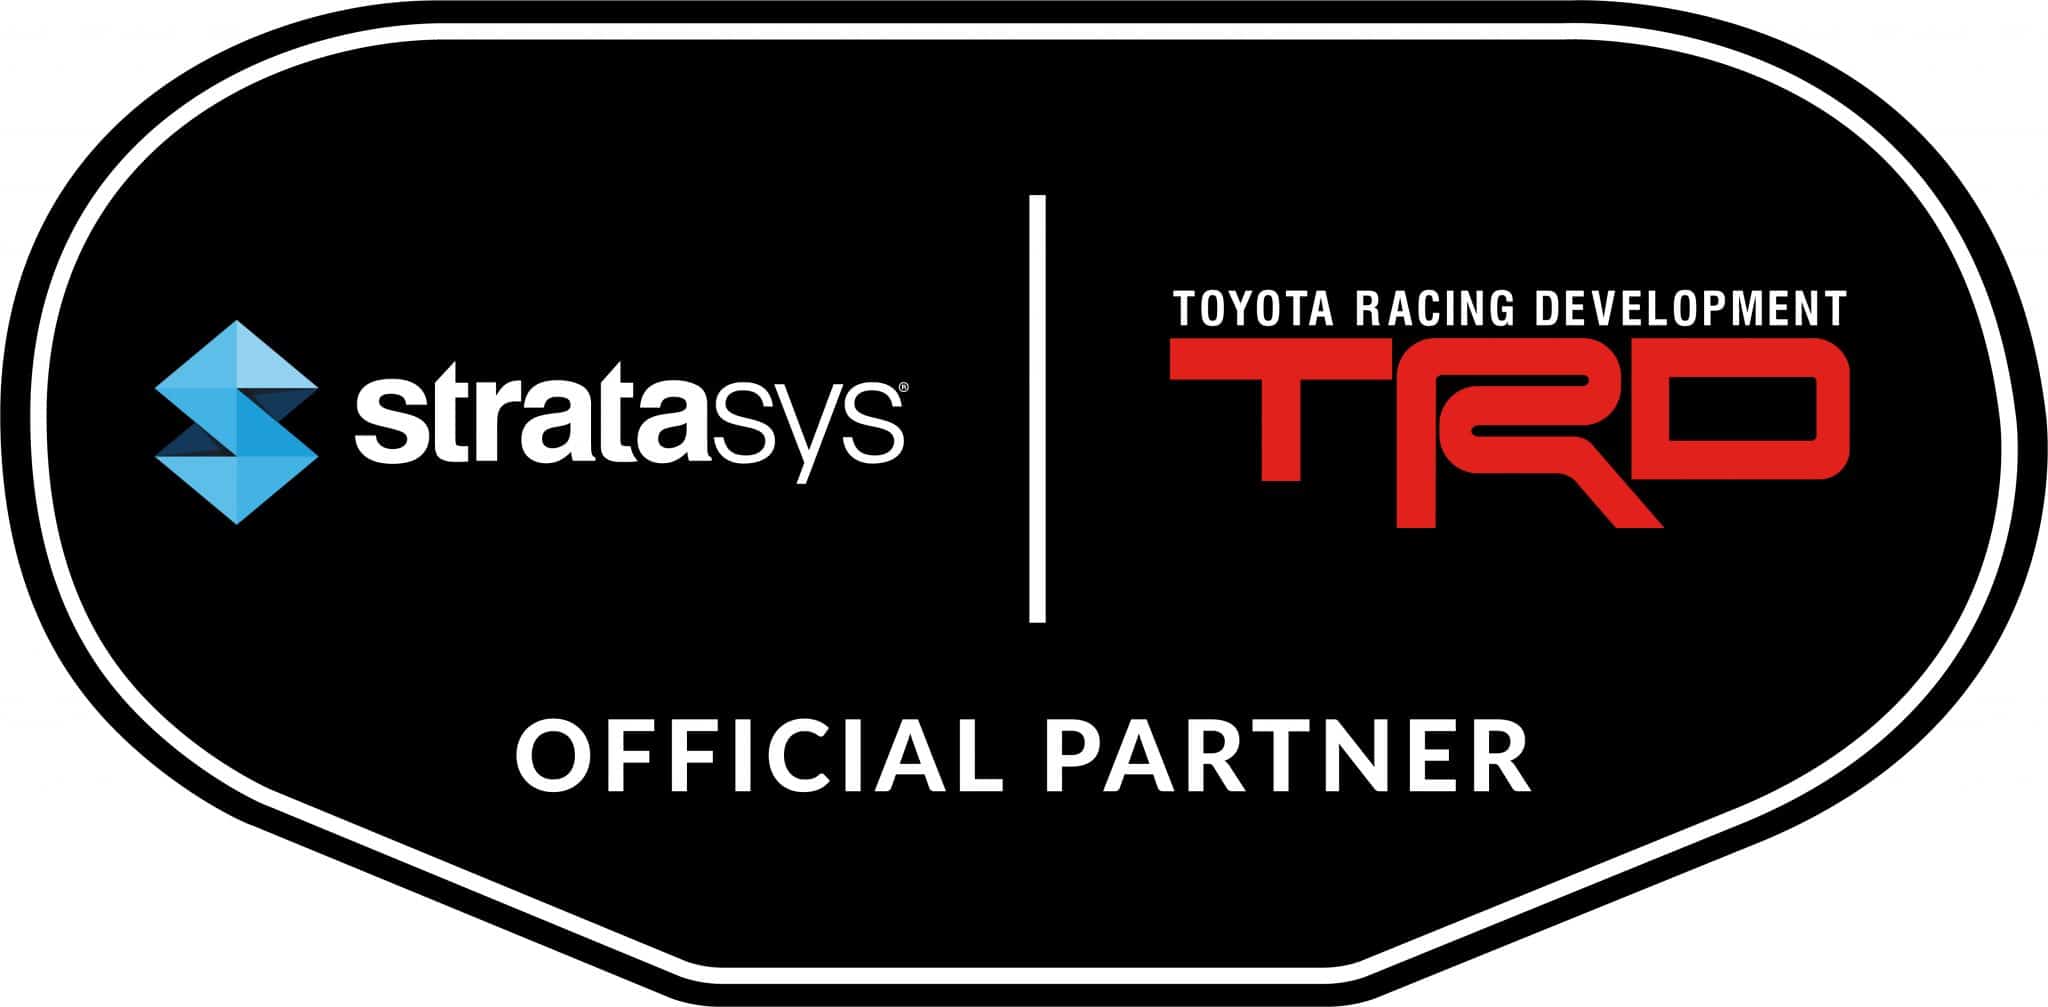 Toyota Racing Development (TRD) names Stratasys as official partner Additive Manufacturing